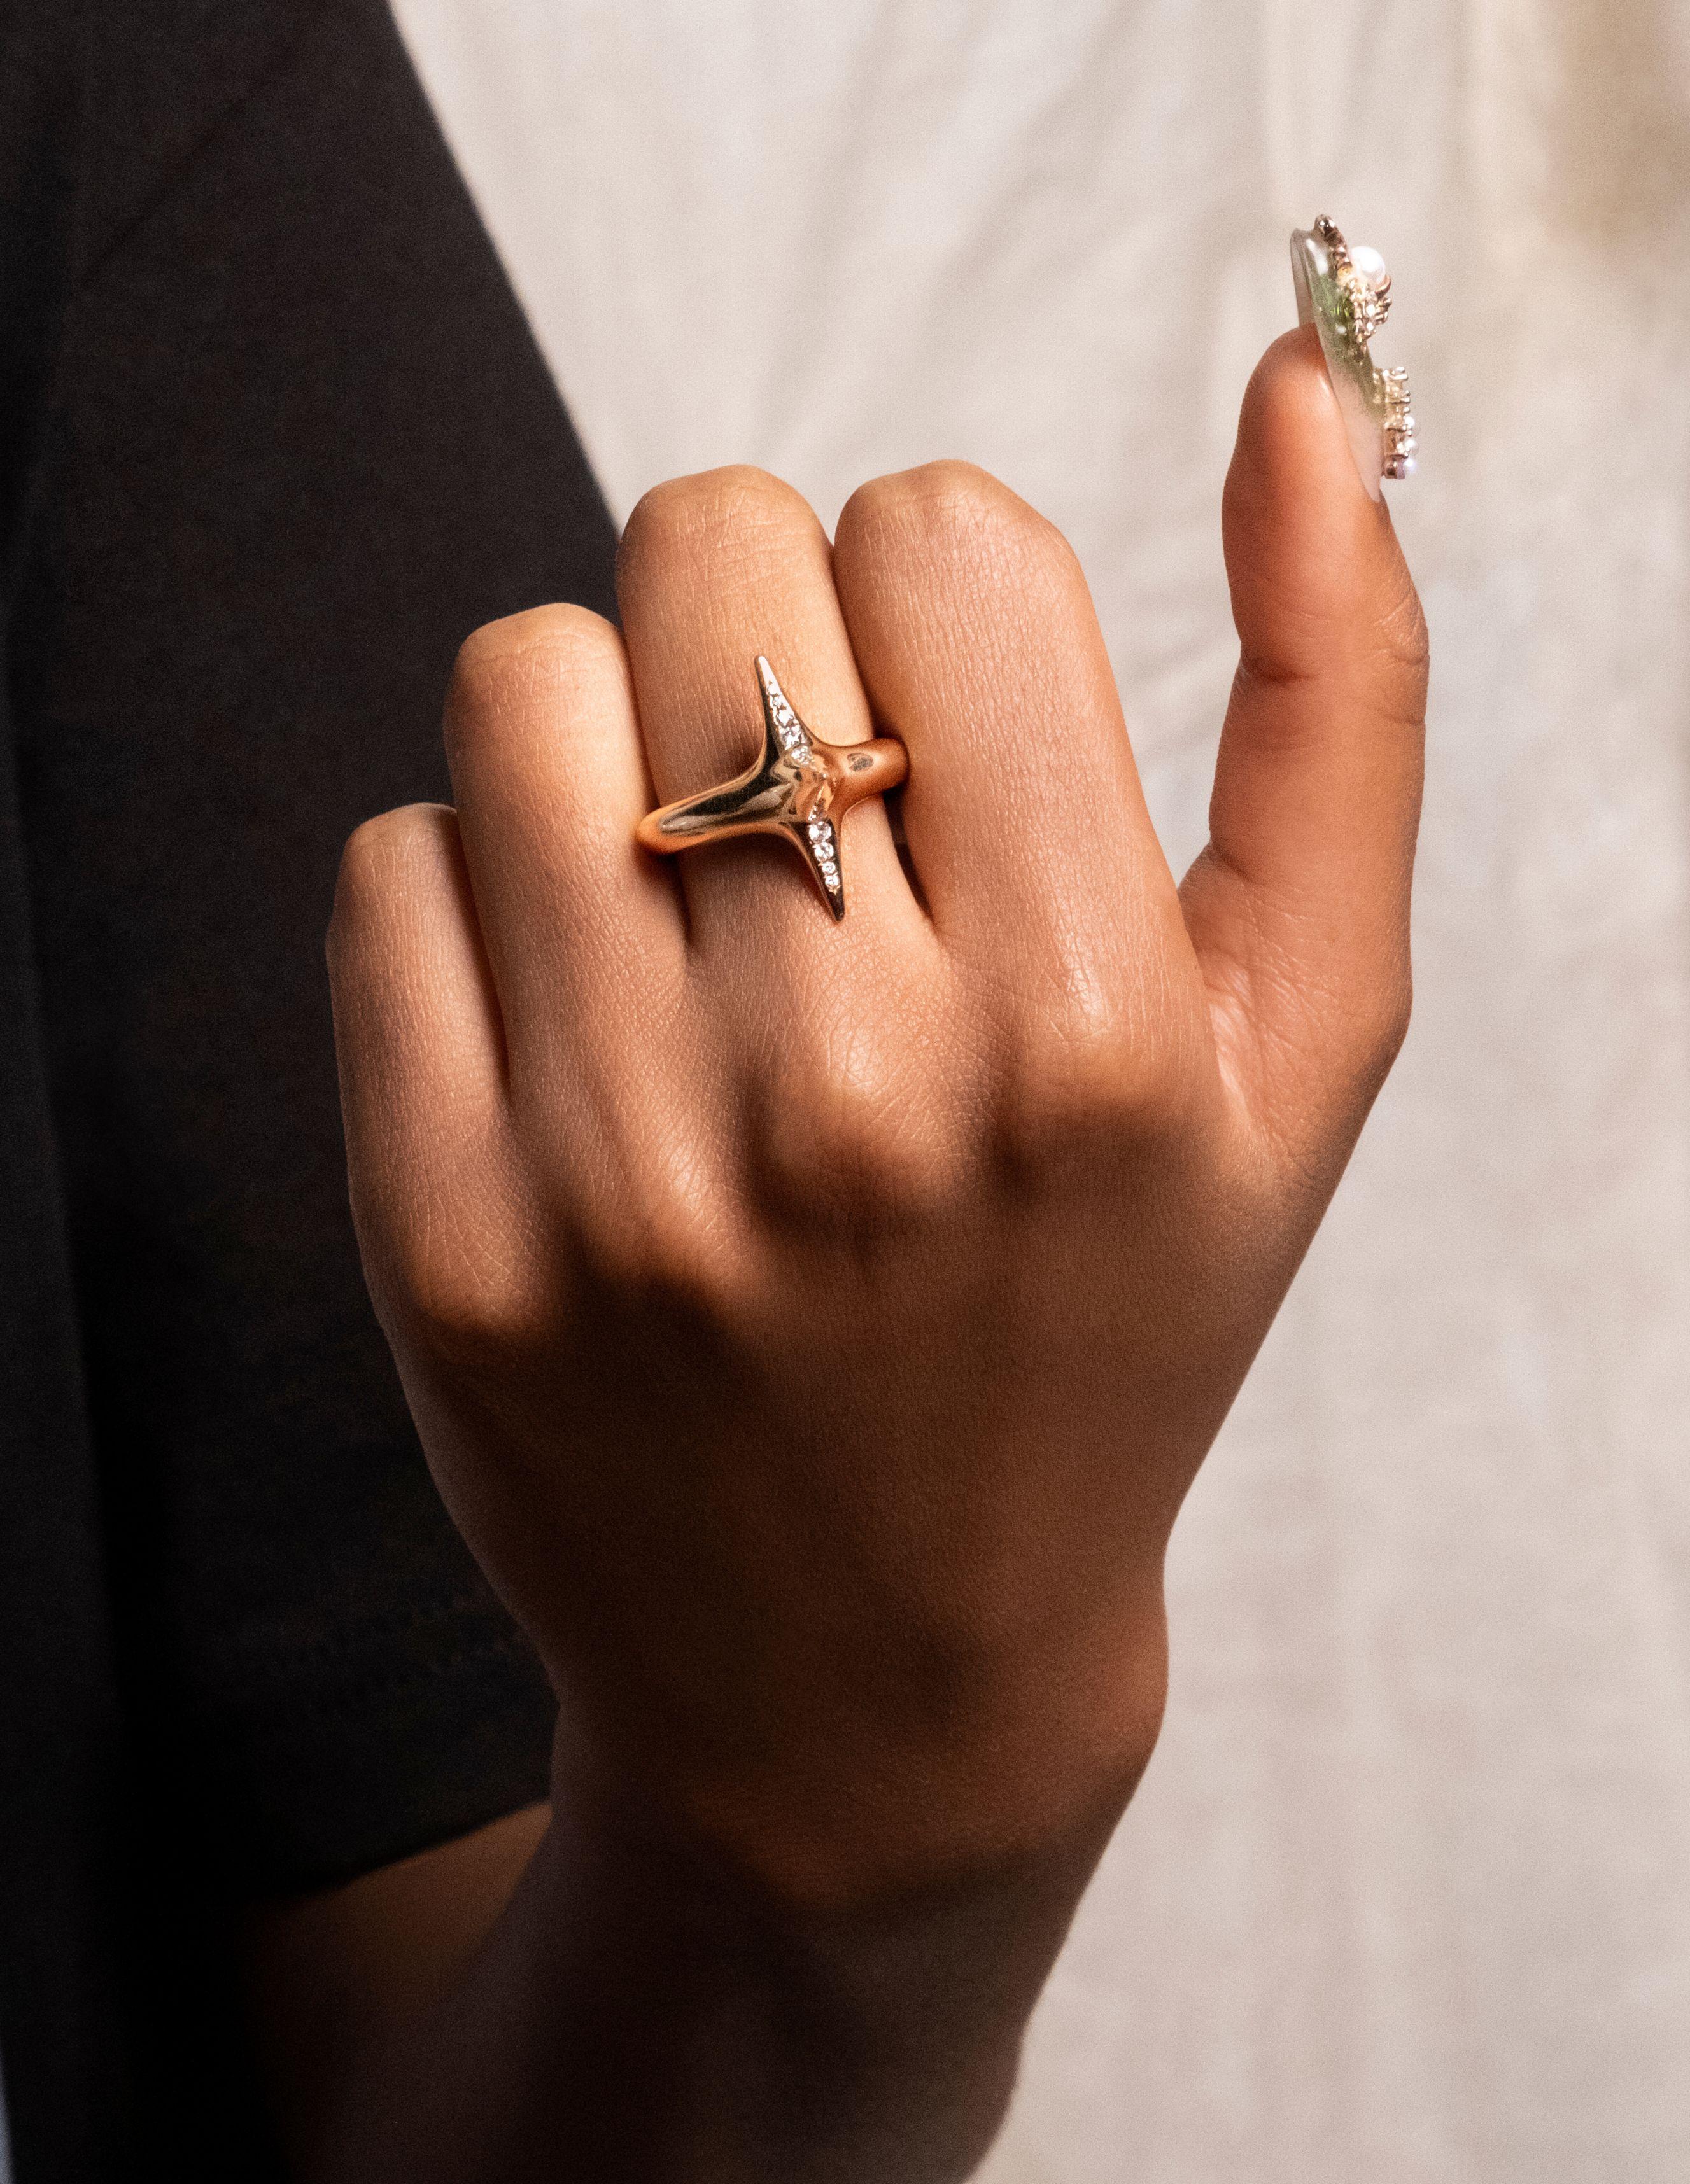 A spiked ring rendered in 18K Gold set with Diamonds. A reminder of one’s ability to act alone in advancing what one believes in.


This item is produced made-to-order and has a 3-6 week production lead time.  Inquire for additional size or